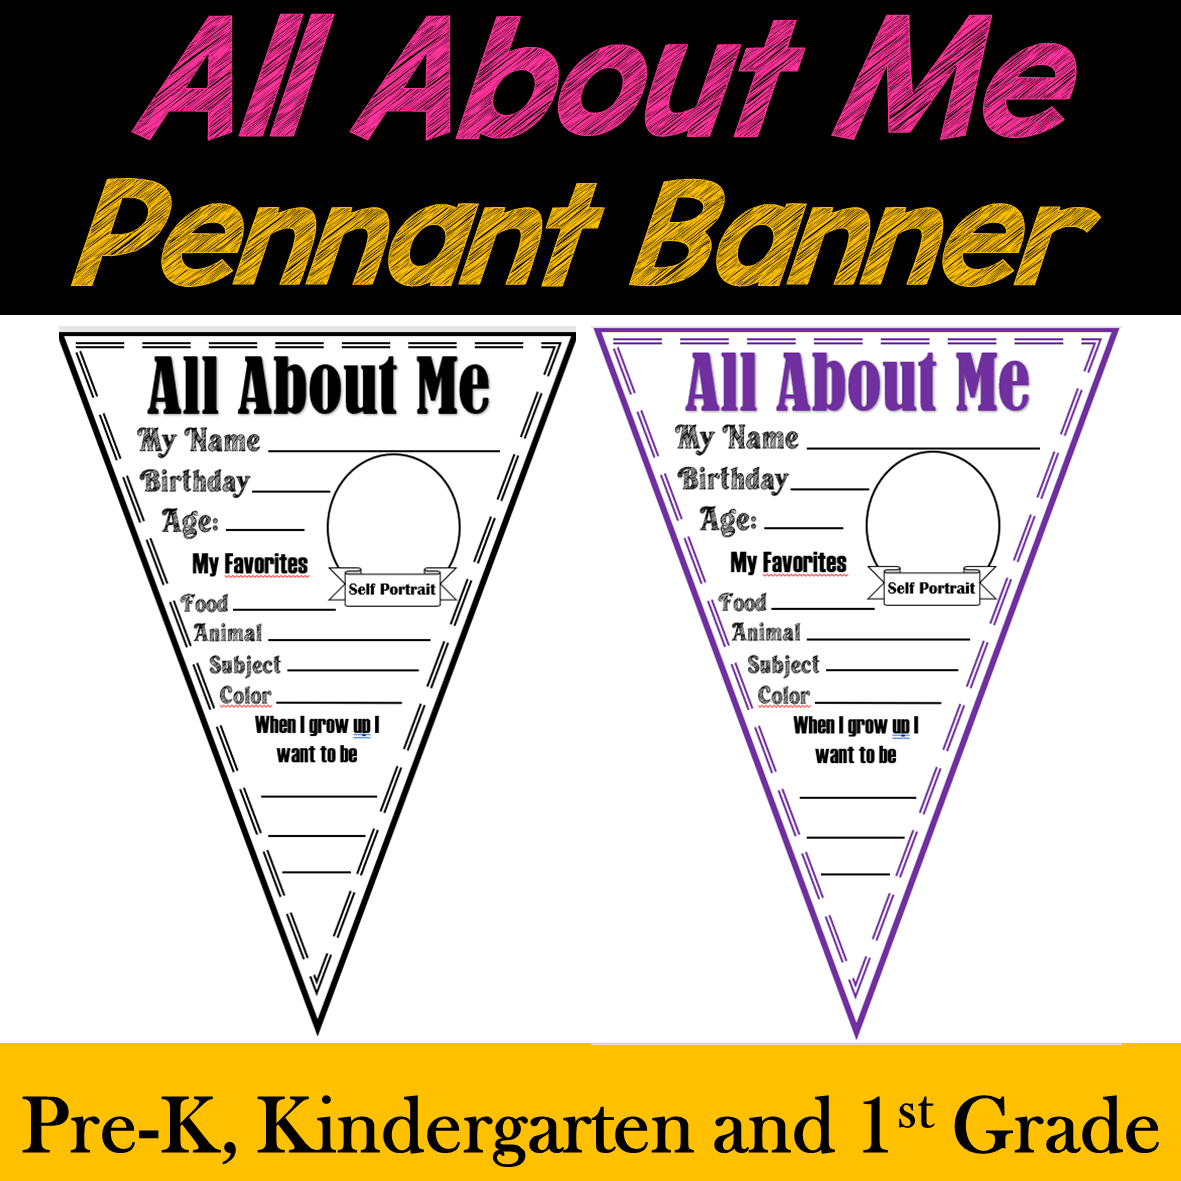 All About Me Pennant Banner | Back to School Classroom Display